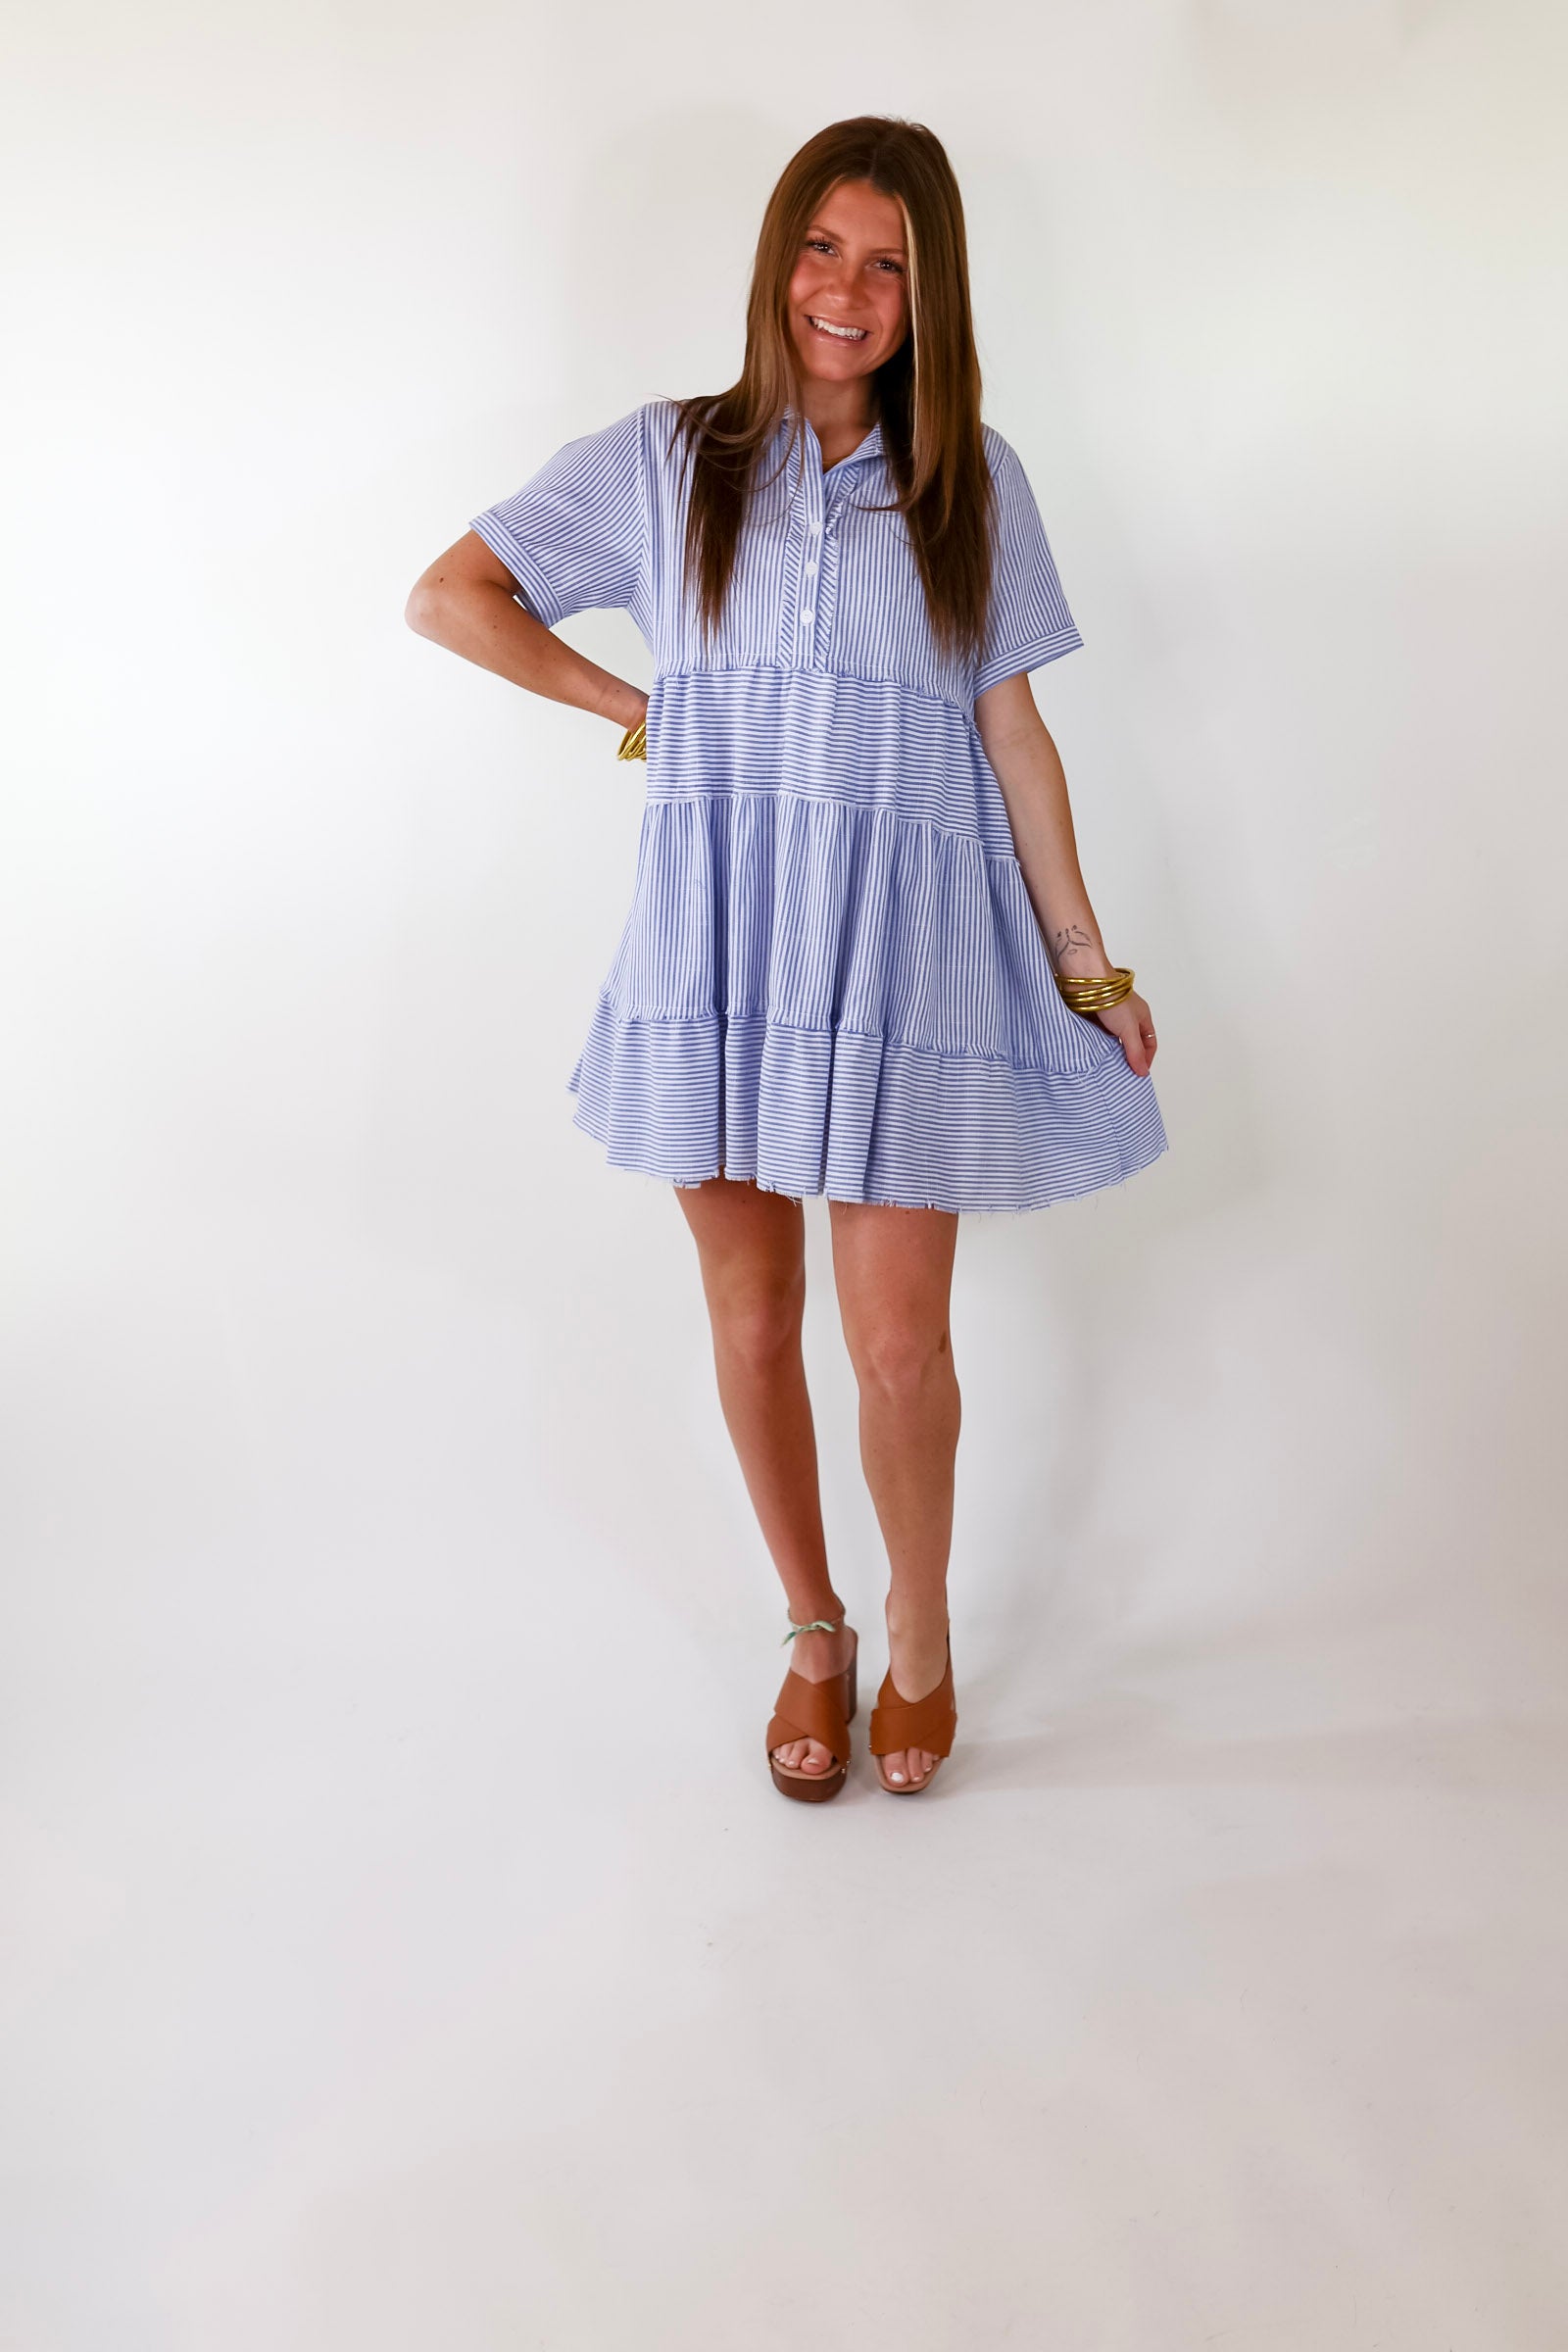 Casual Greetings Collared Pinstripe Dress in Blue and White - Giddy Up Glamour Boutique